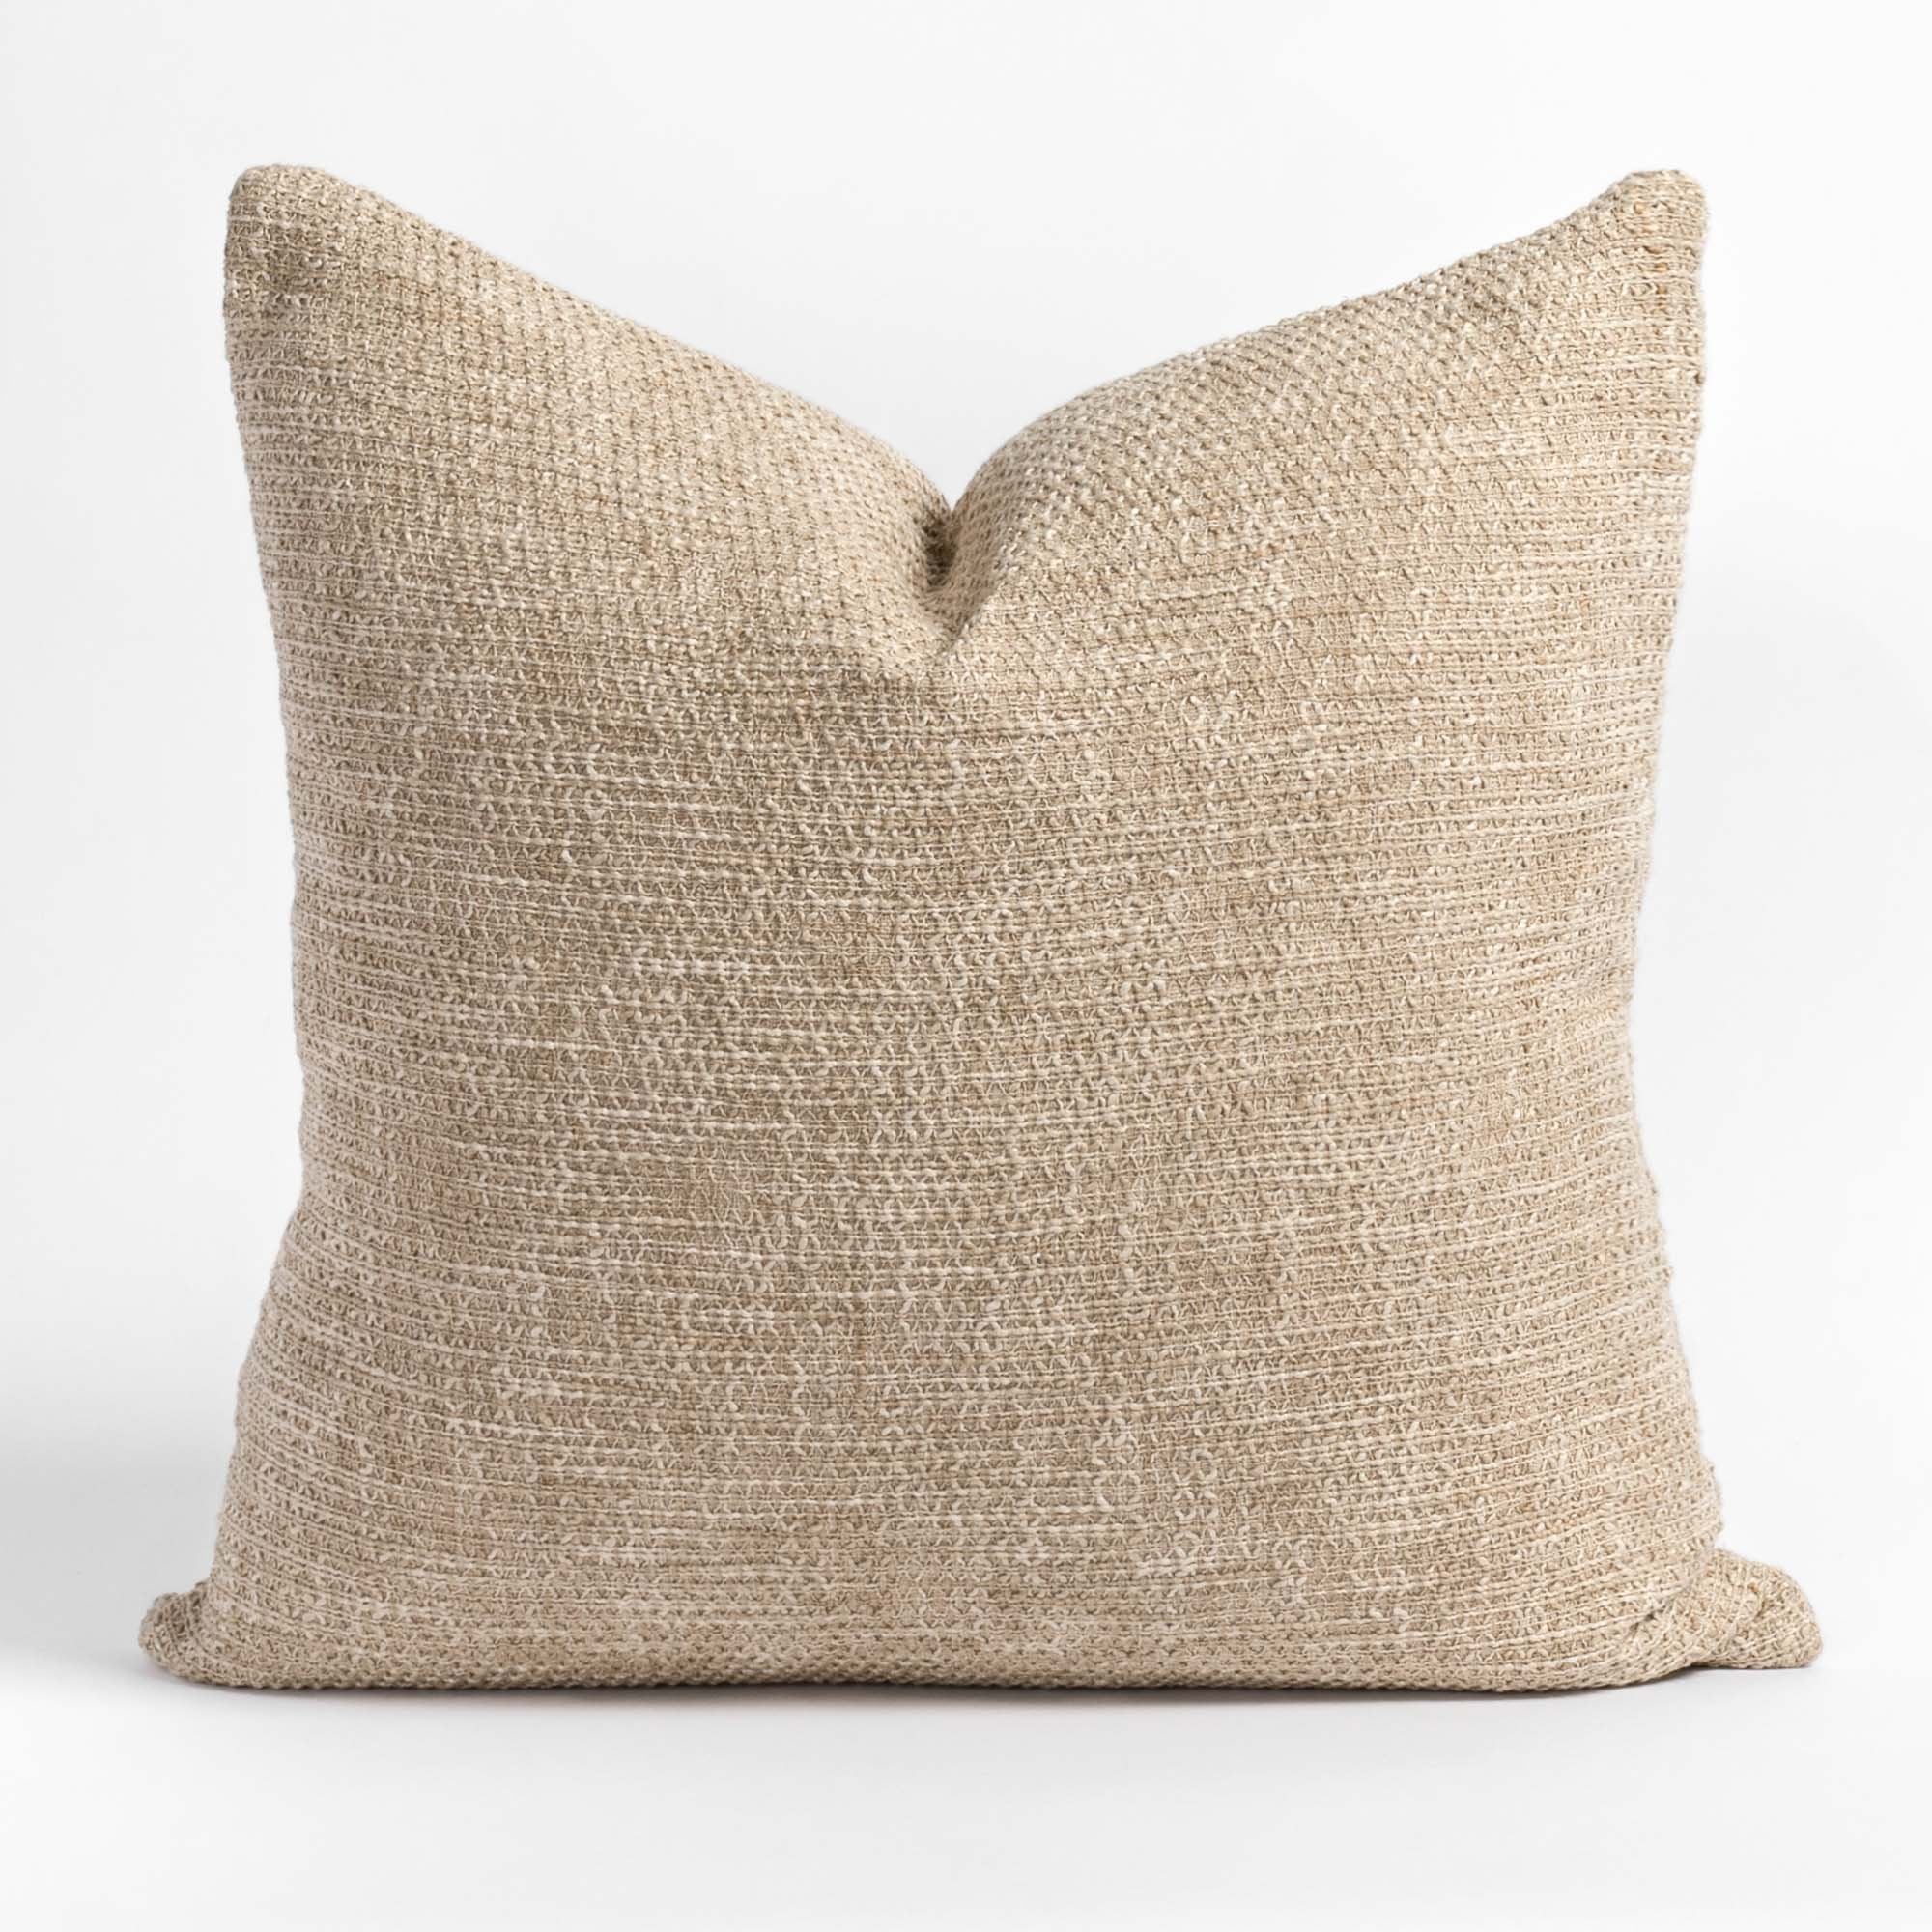 Taryn 22" x 22" Natural, a beige textured pillow from Tonic Living